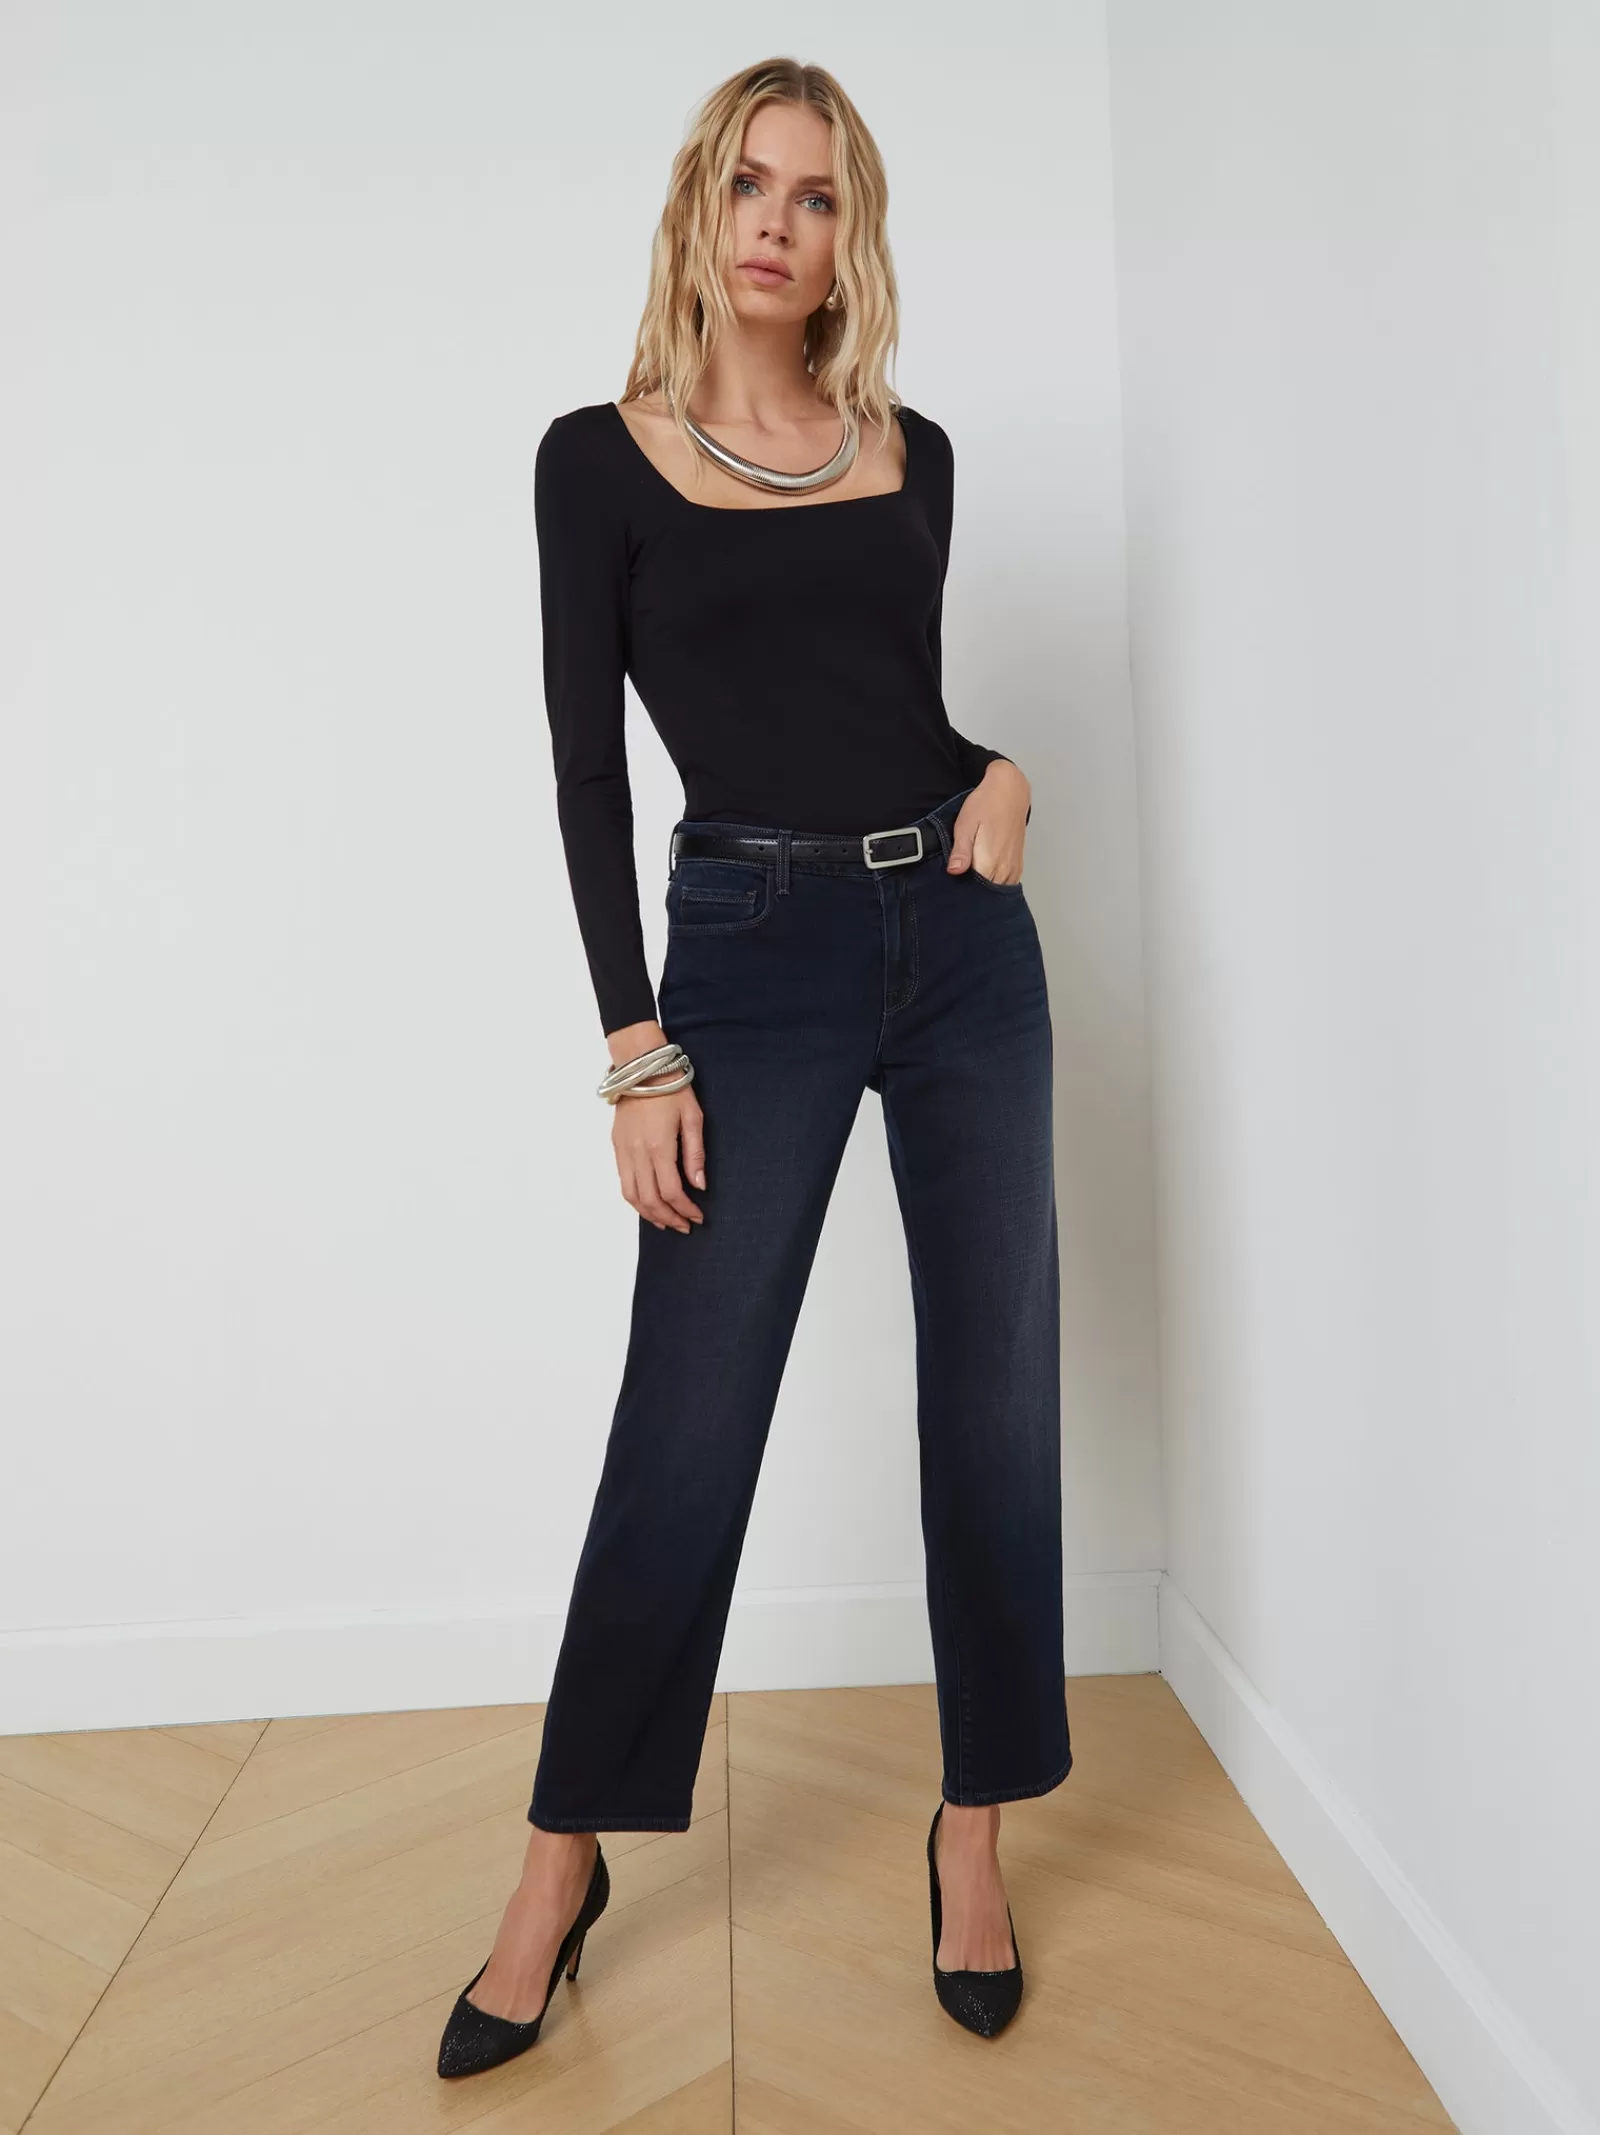 L'AGENCE Kinley Top< All Things Black | Blouses & Tops